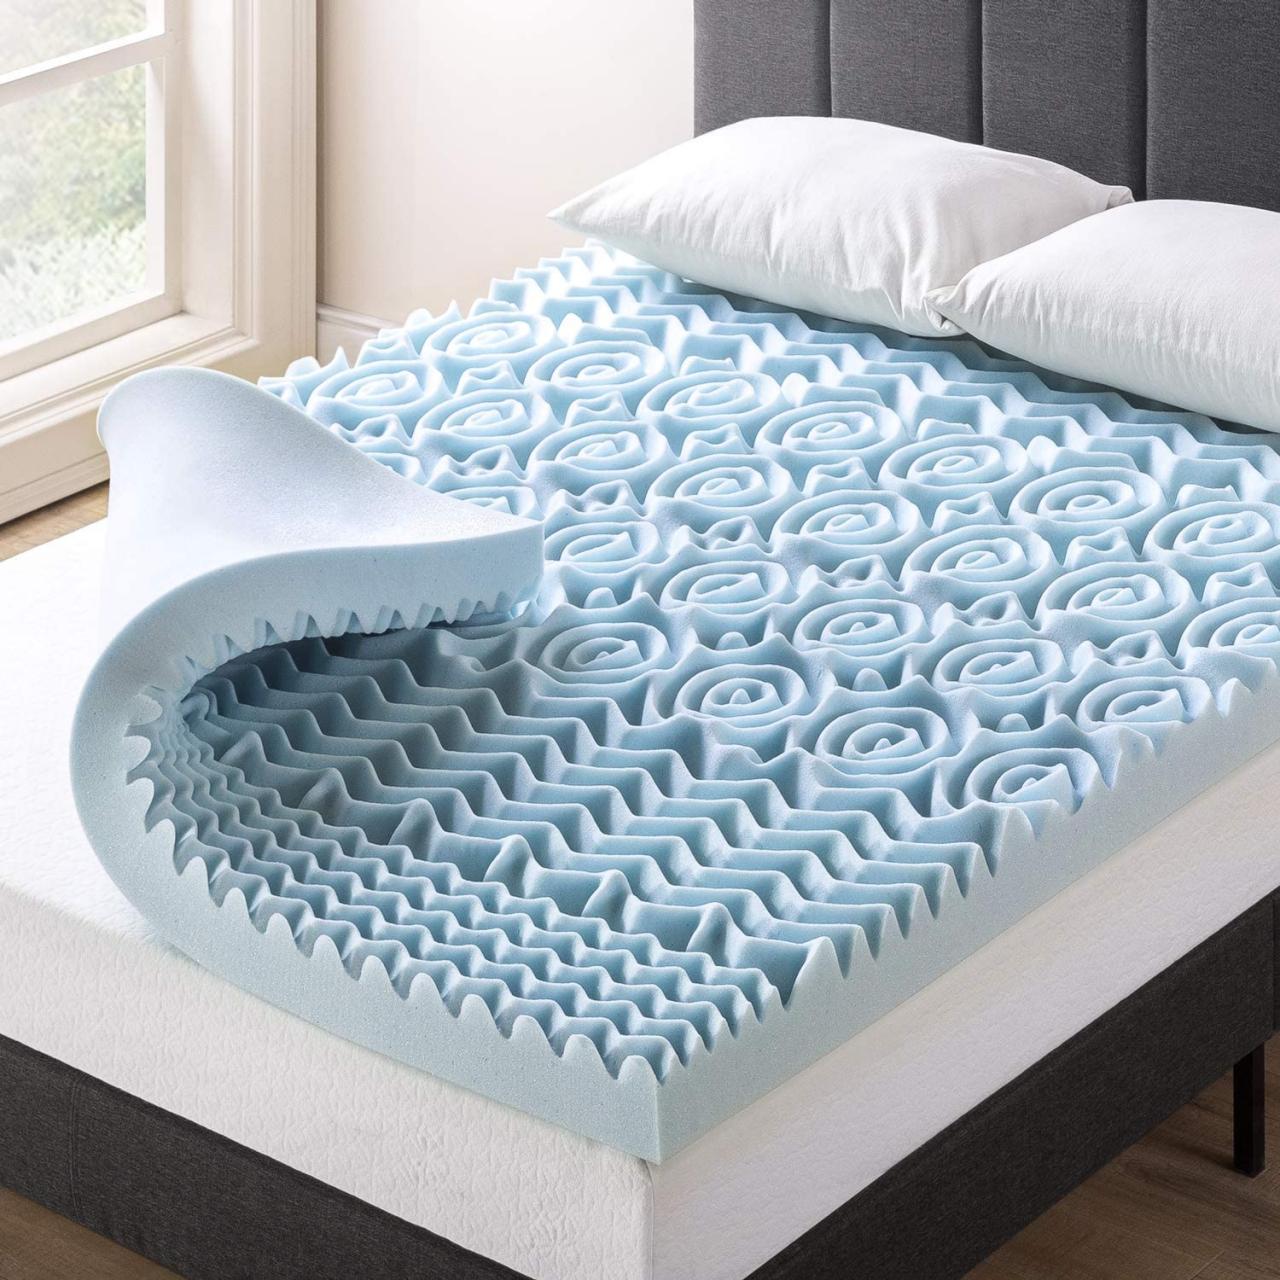 Buy Best Price Mattress 4 Inch 5-Zone Memory Foam Mattress Topper with  Cooling Gel Infusion, CertiPUR-US Certified, TwinXL Online in Indonesia.  B08DCNJWH5